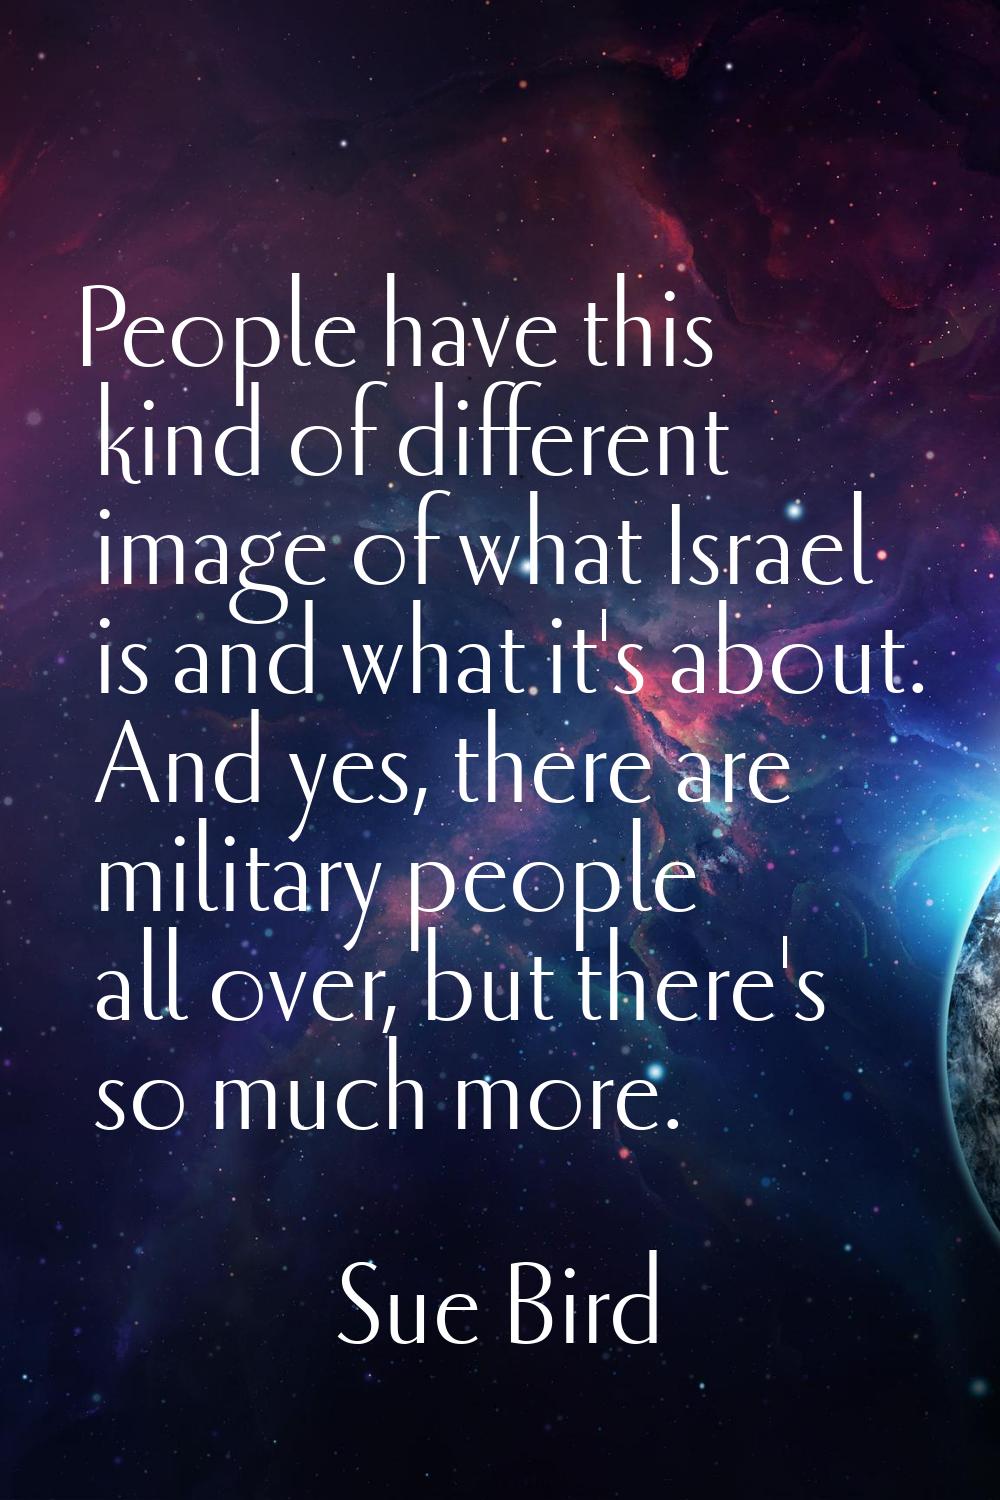 People have this kind of different image of what Israel is and what it's about. And yes, there are 